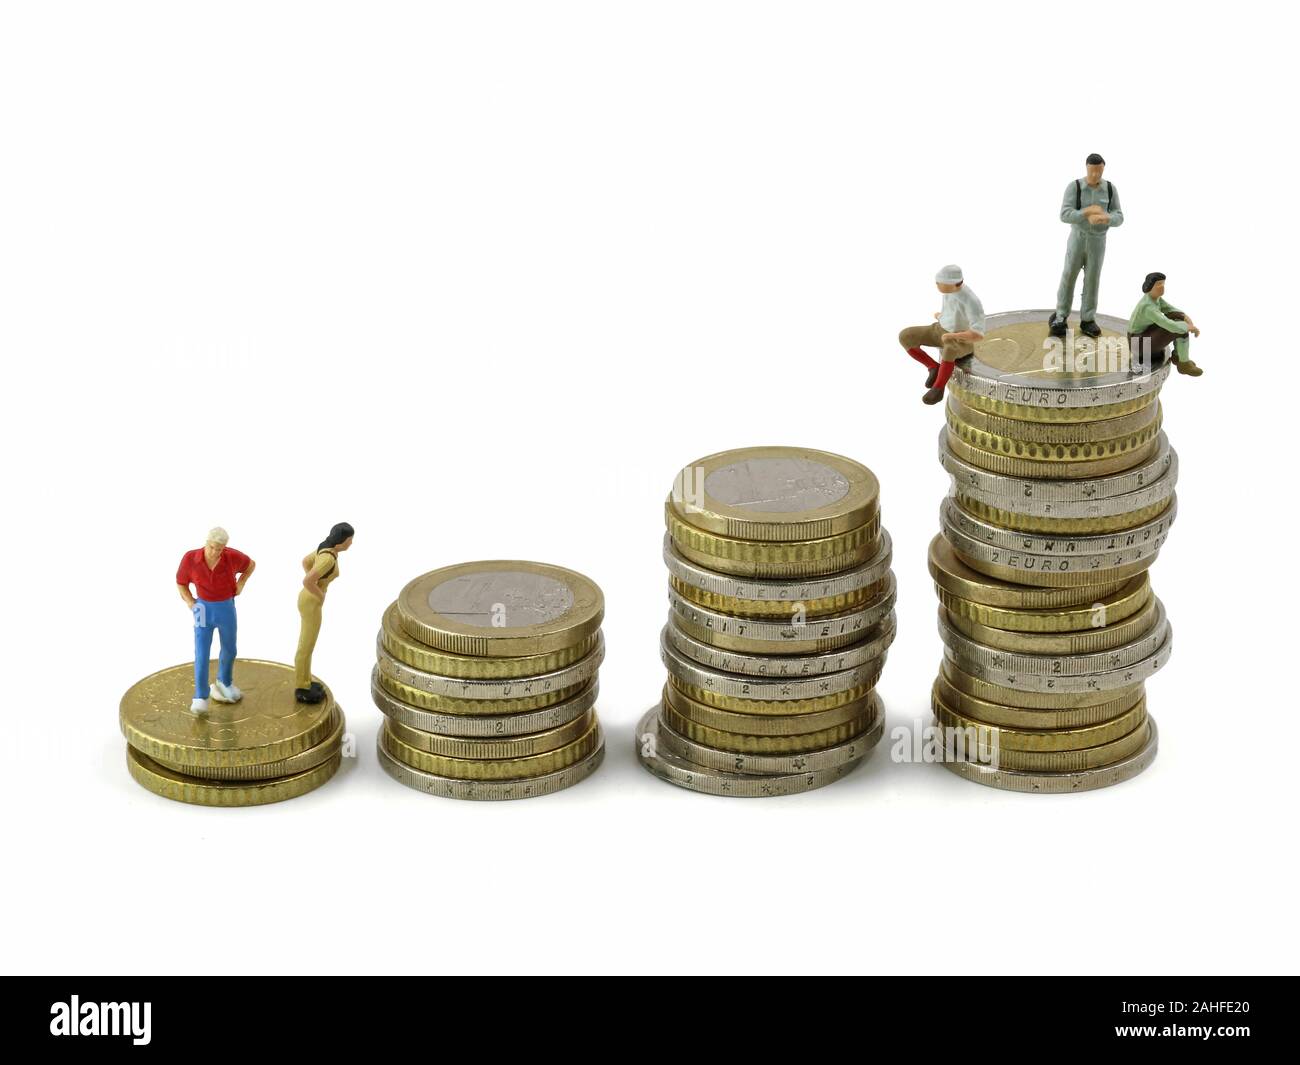 Miniature people on stack of euro coins on white background, concept of imbalance between rich and poor Stock Photo